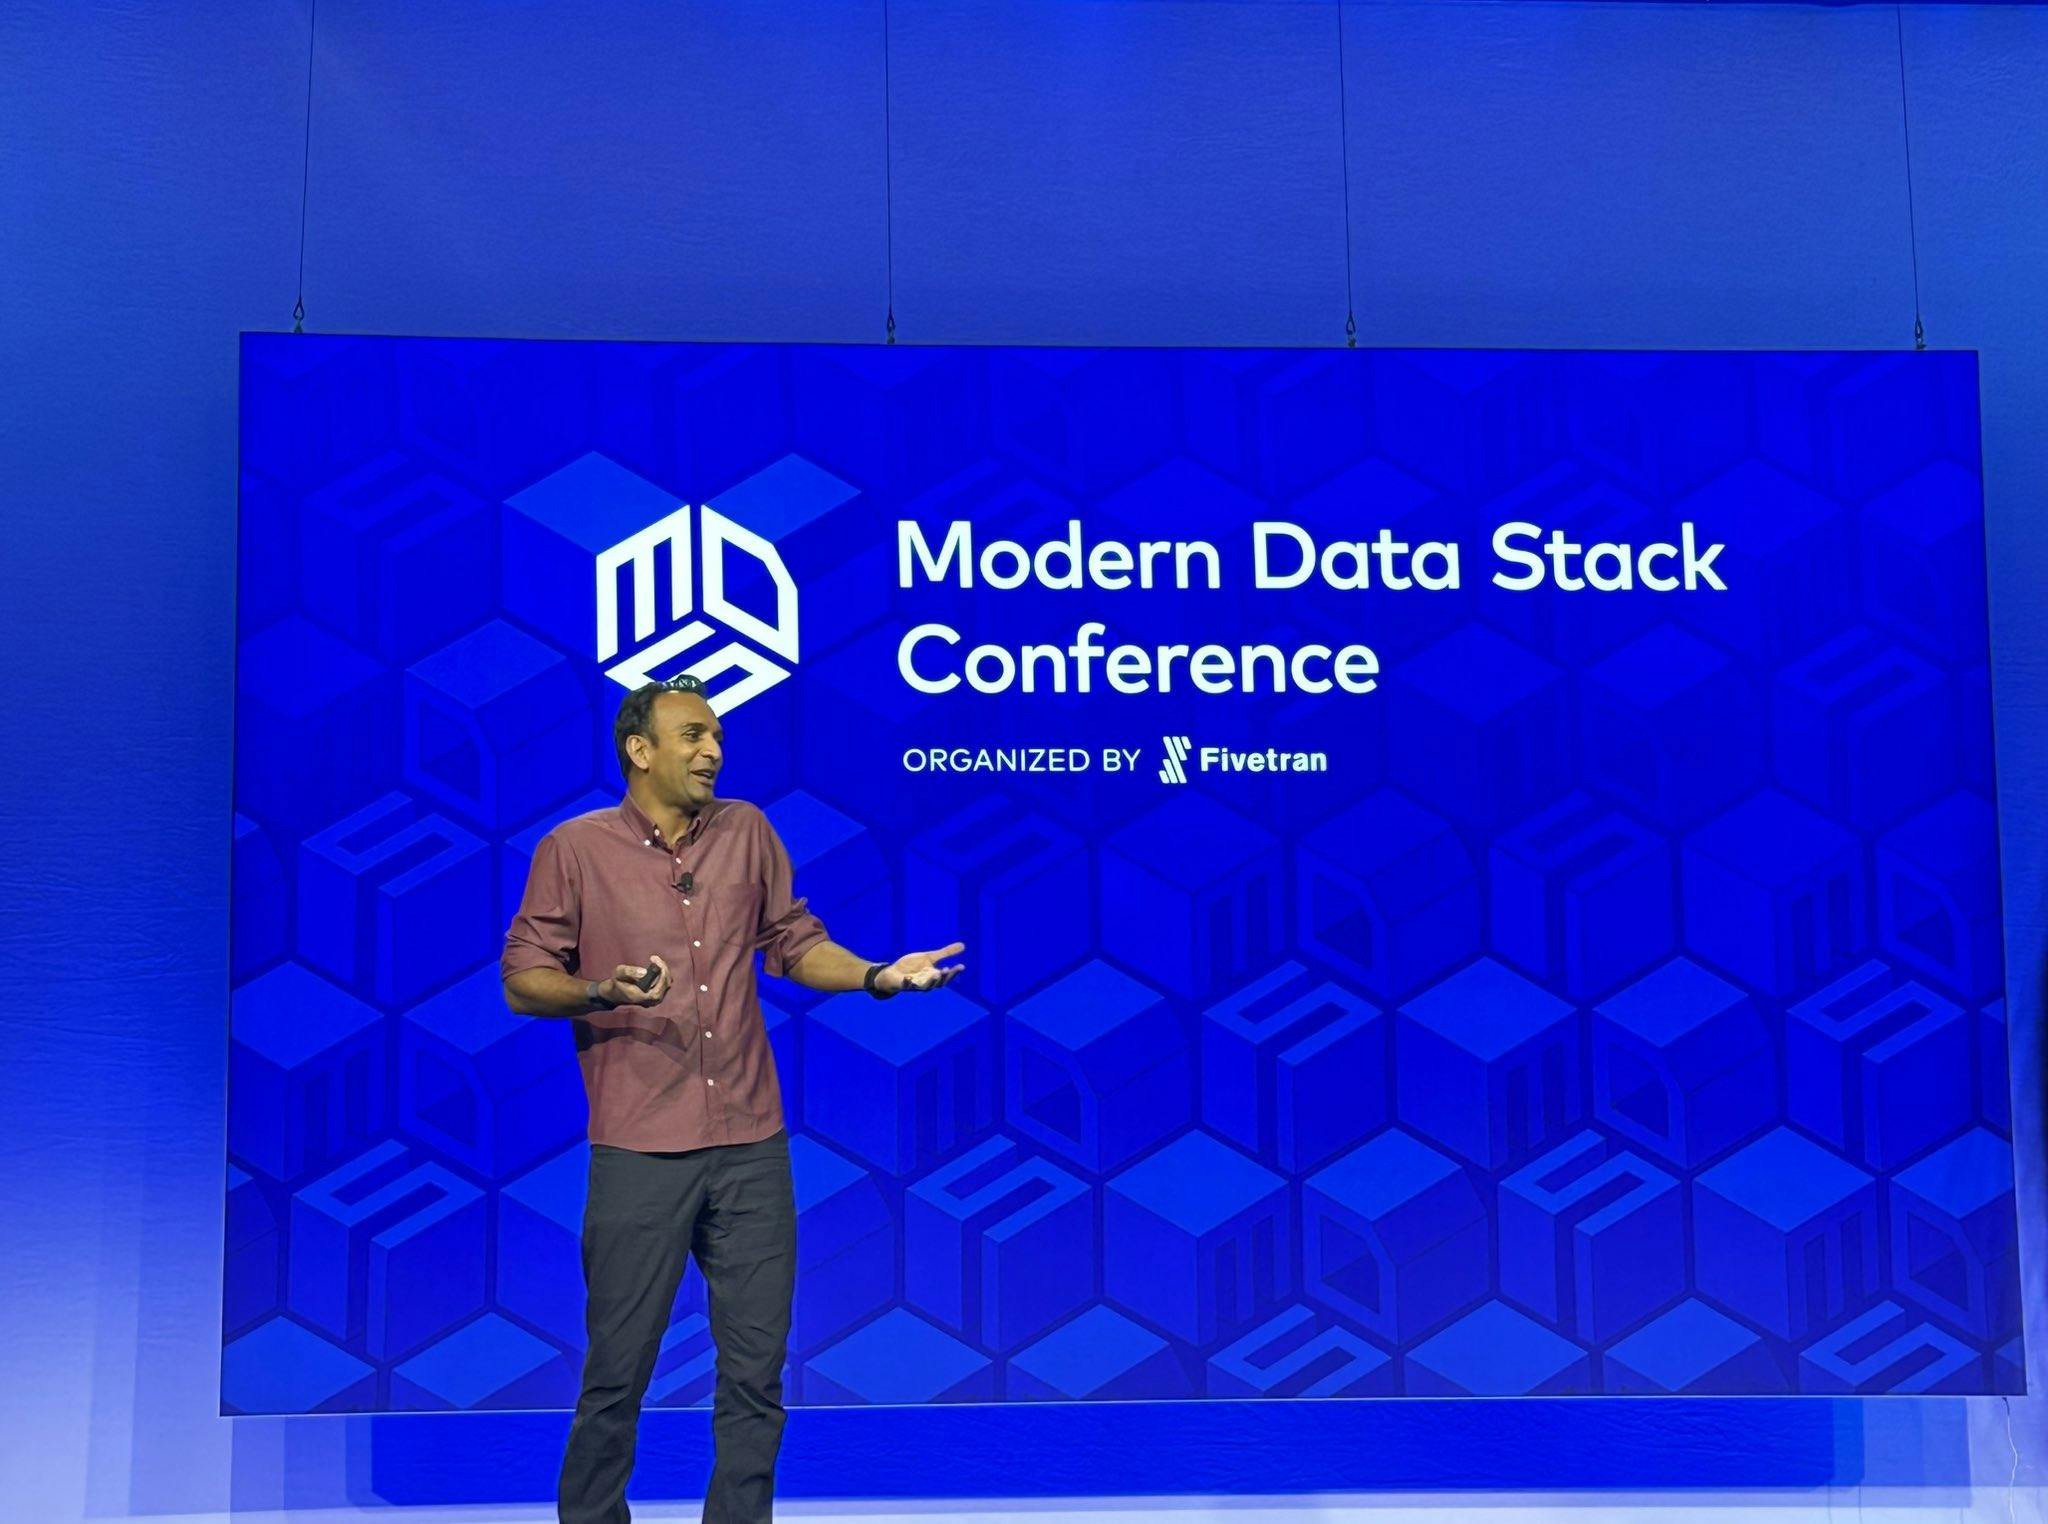 Presenting Moder Data Stack Conference